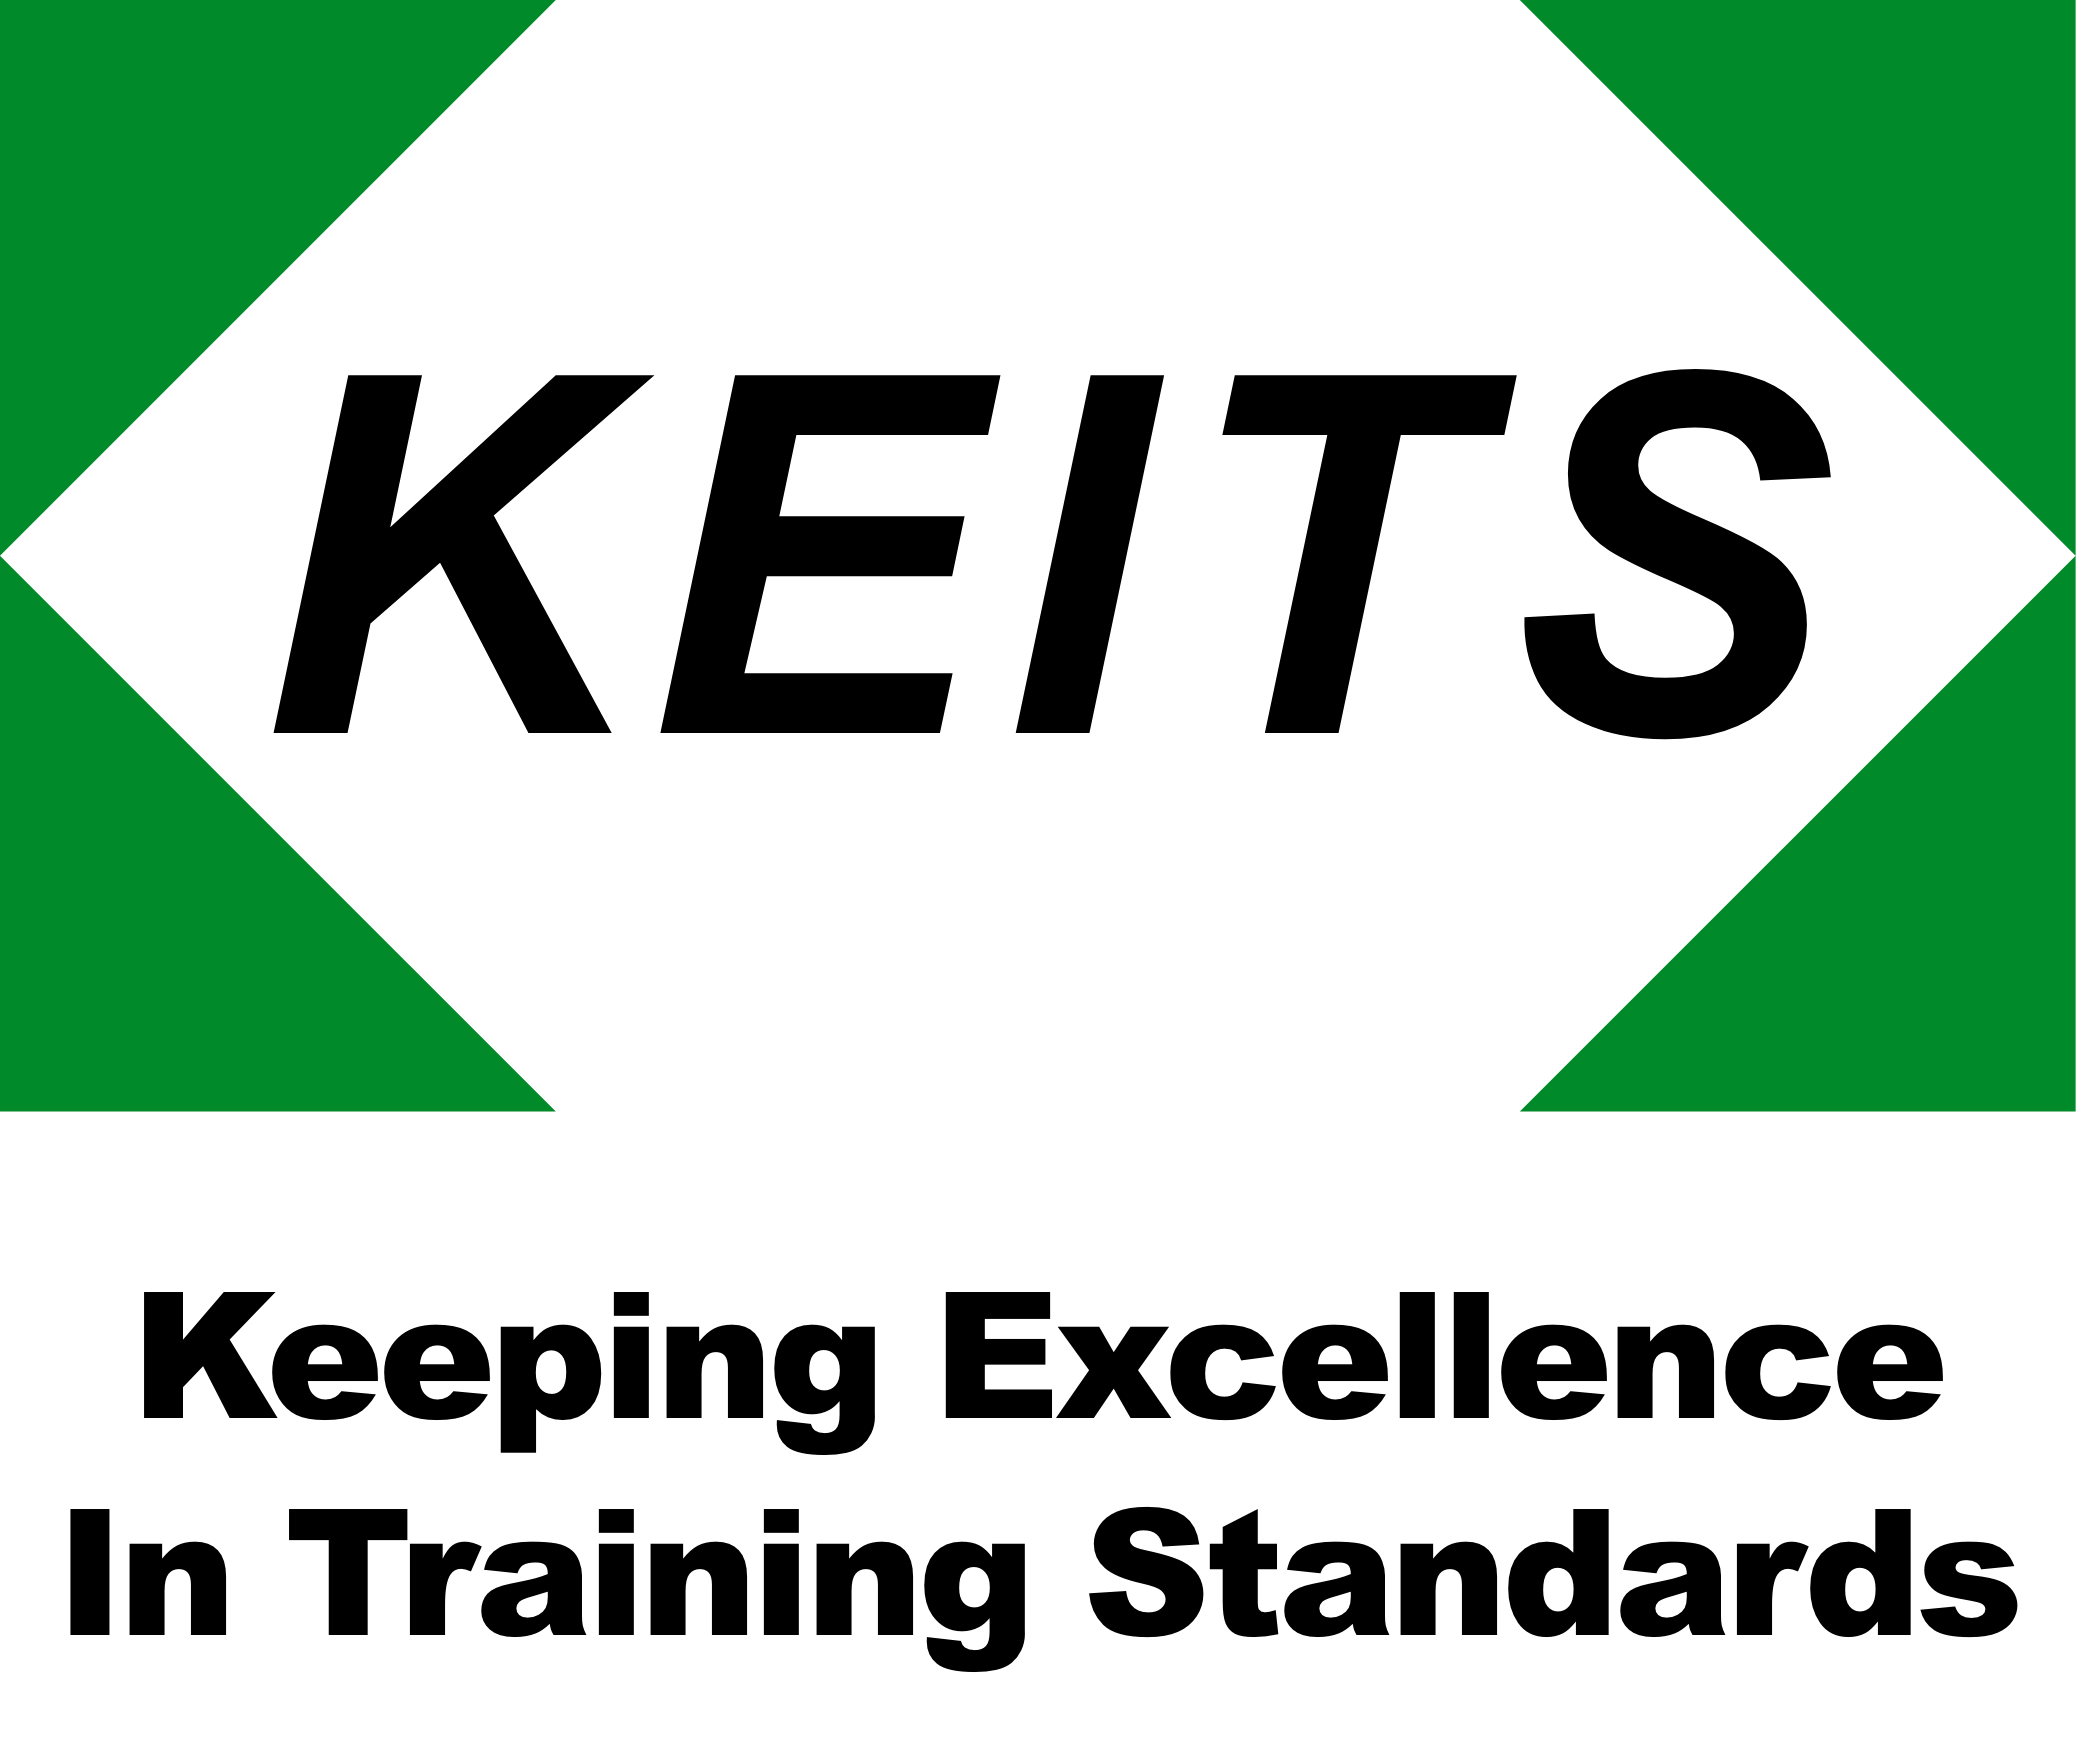 KEITS Training Services Limited